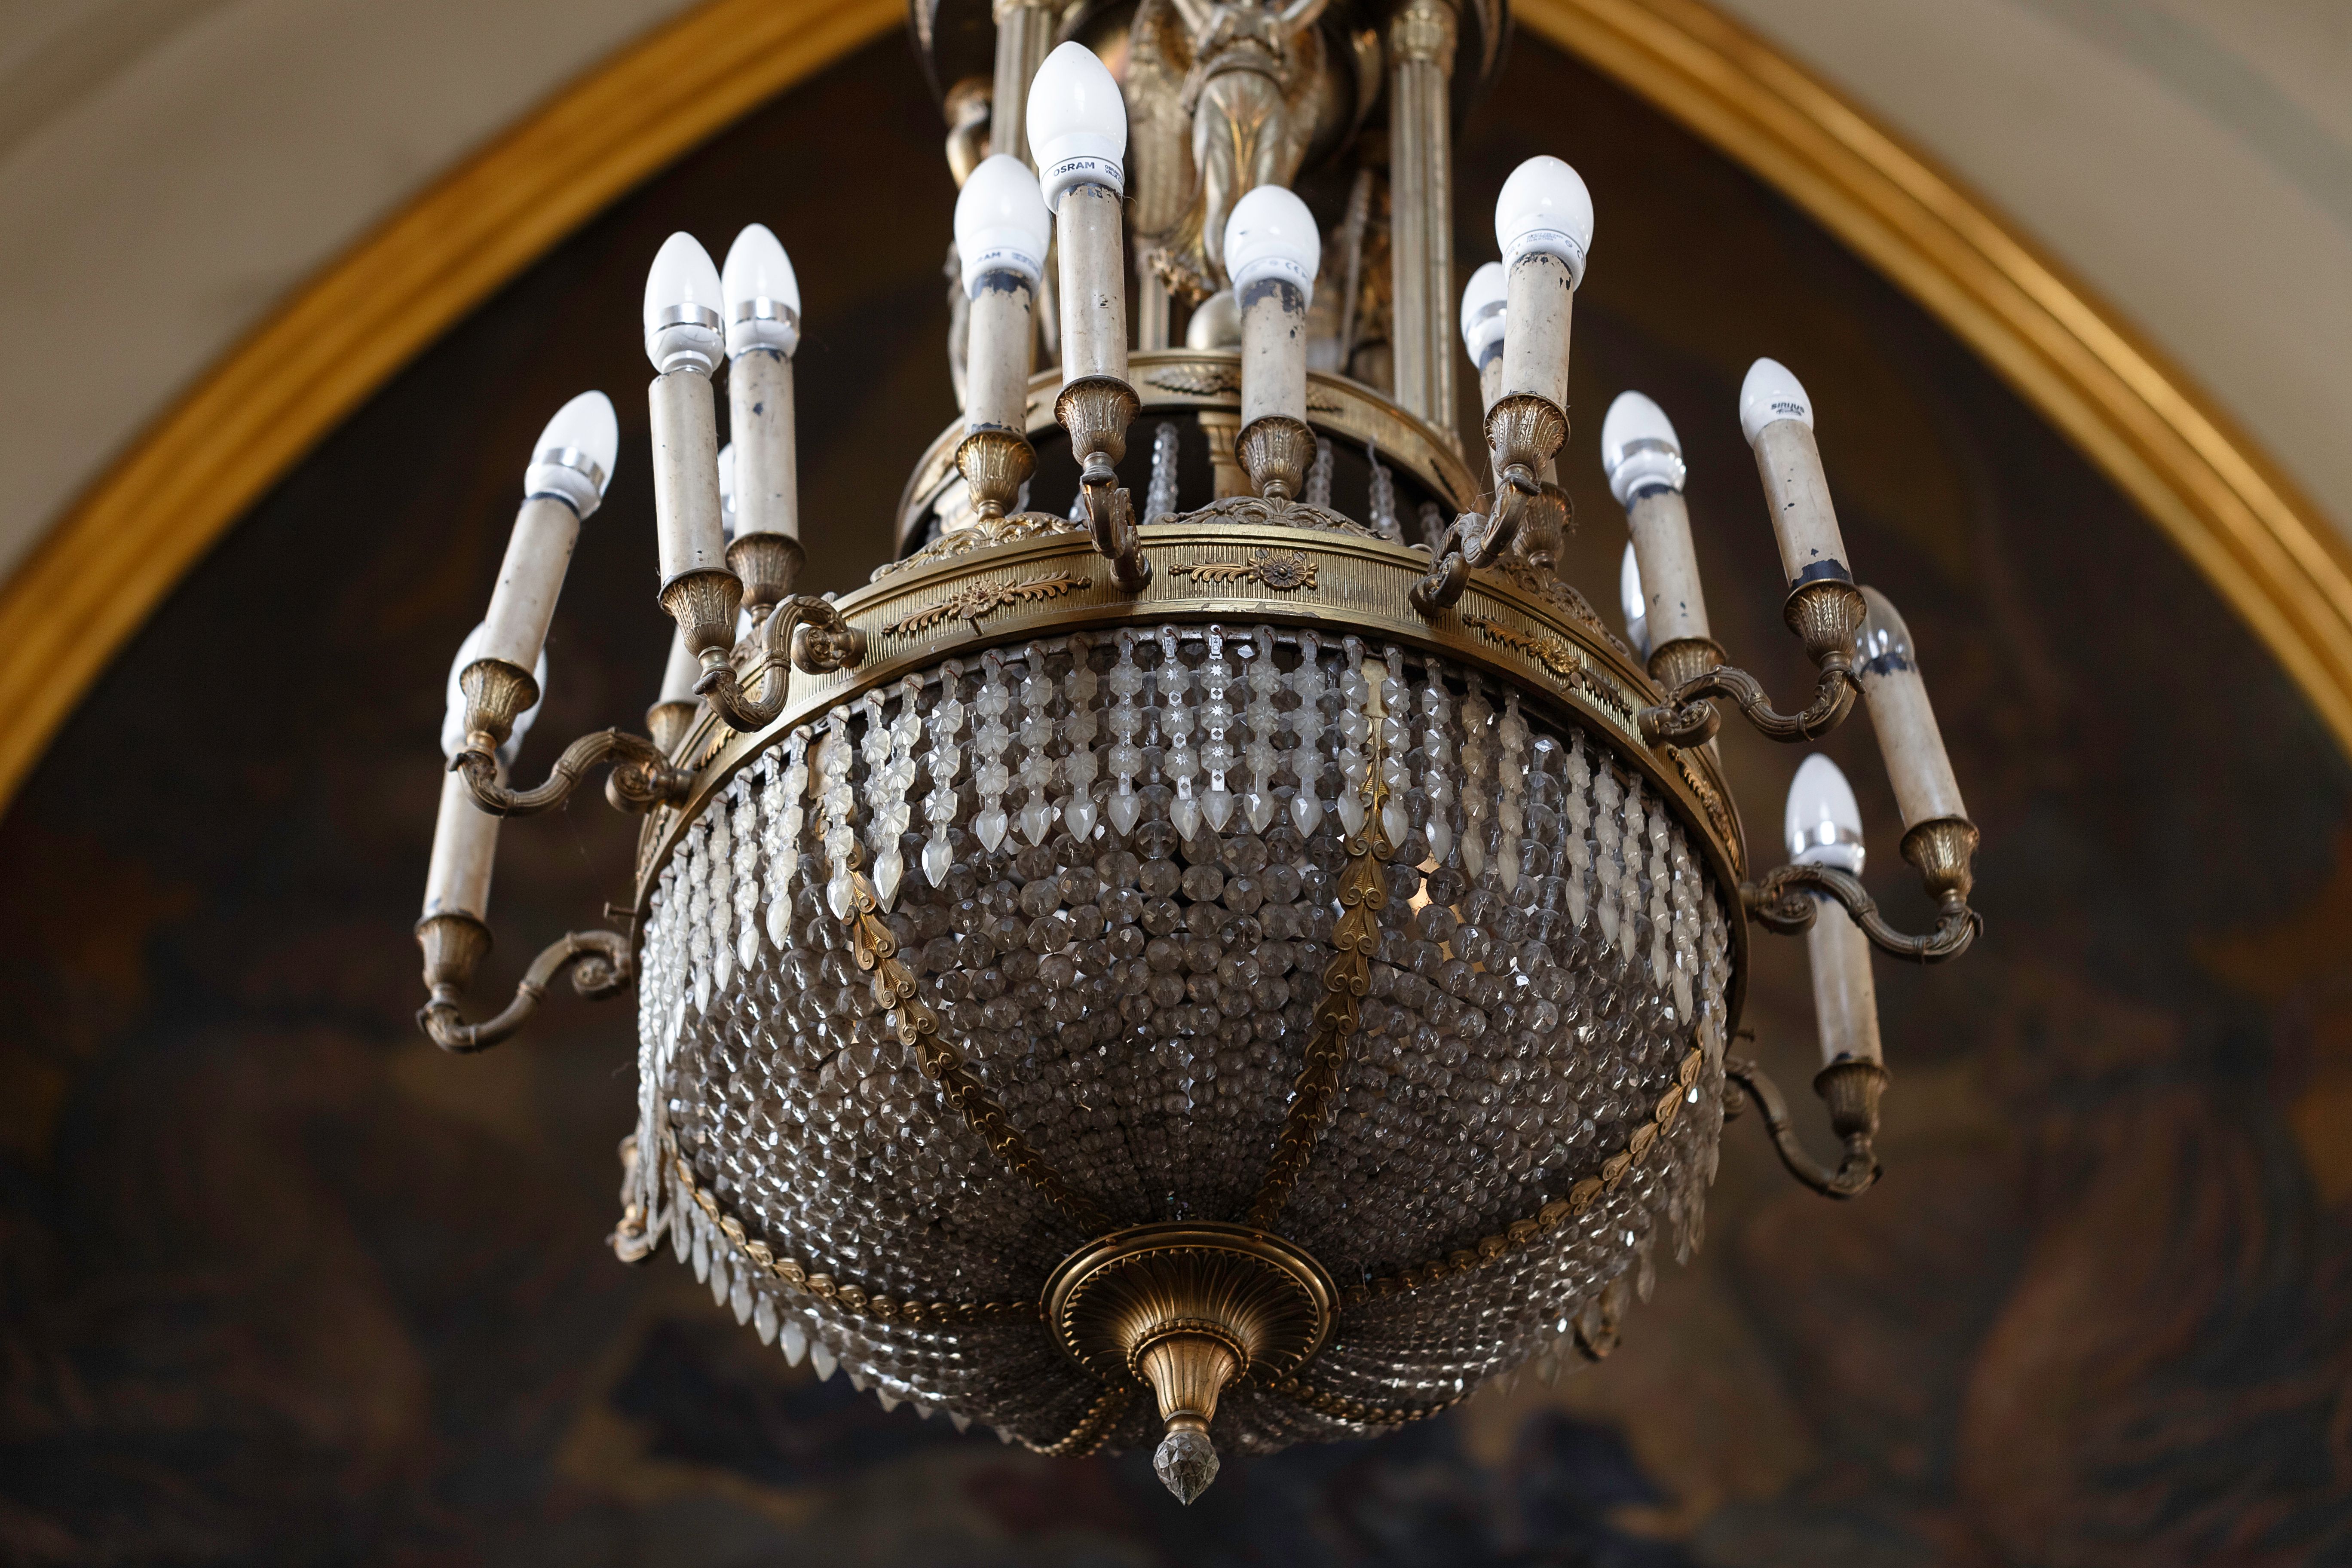 A fragment of the chandelier, 1925, the church of the Assumption of the Blessed Virgin Mary (Vytautas the Great) in Kaunas. Photo by Povilas Jarmala, 2019